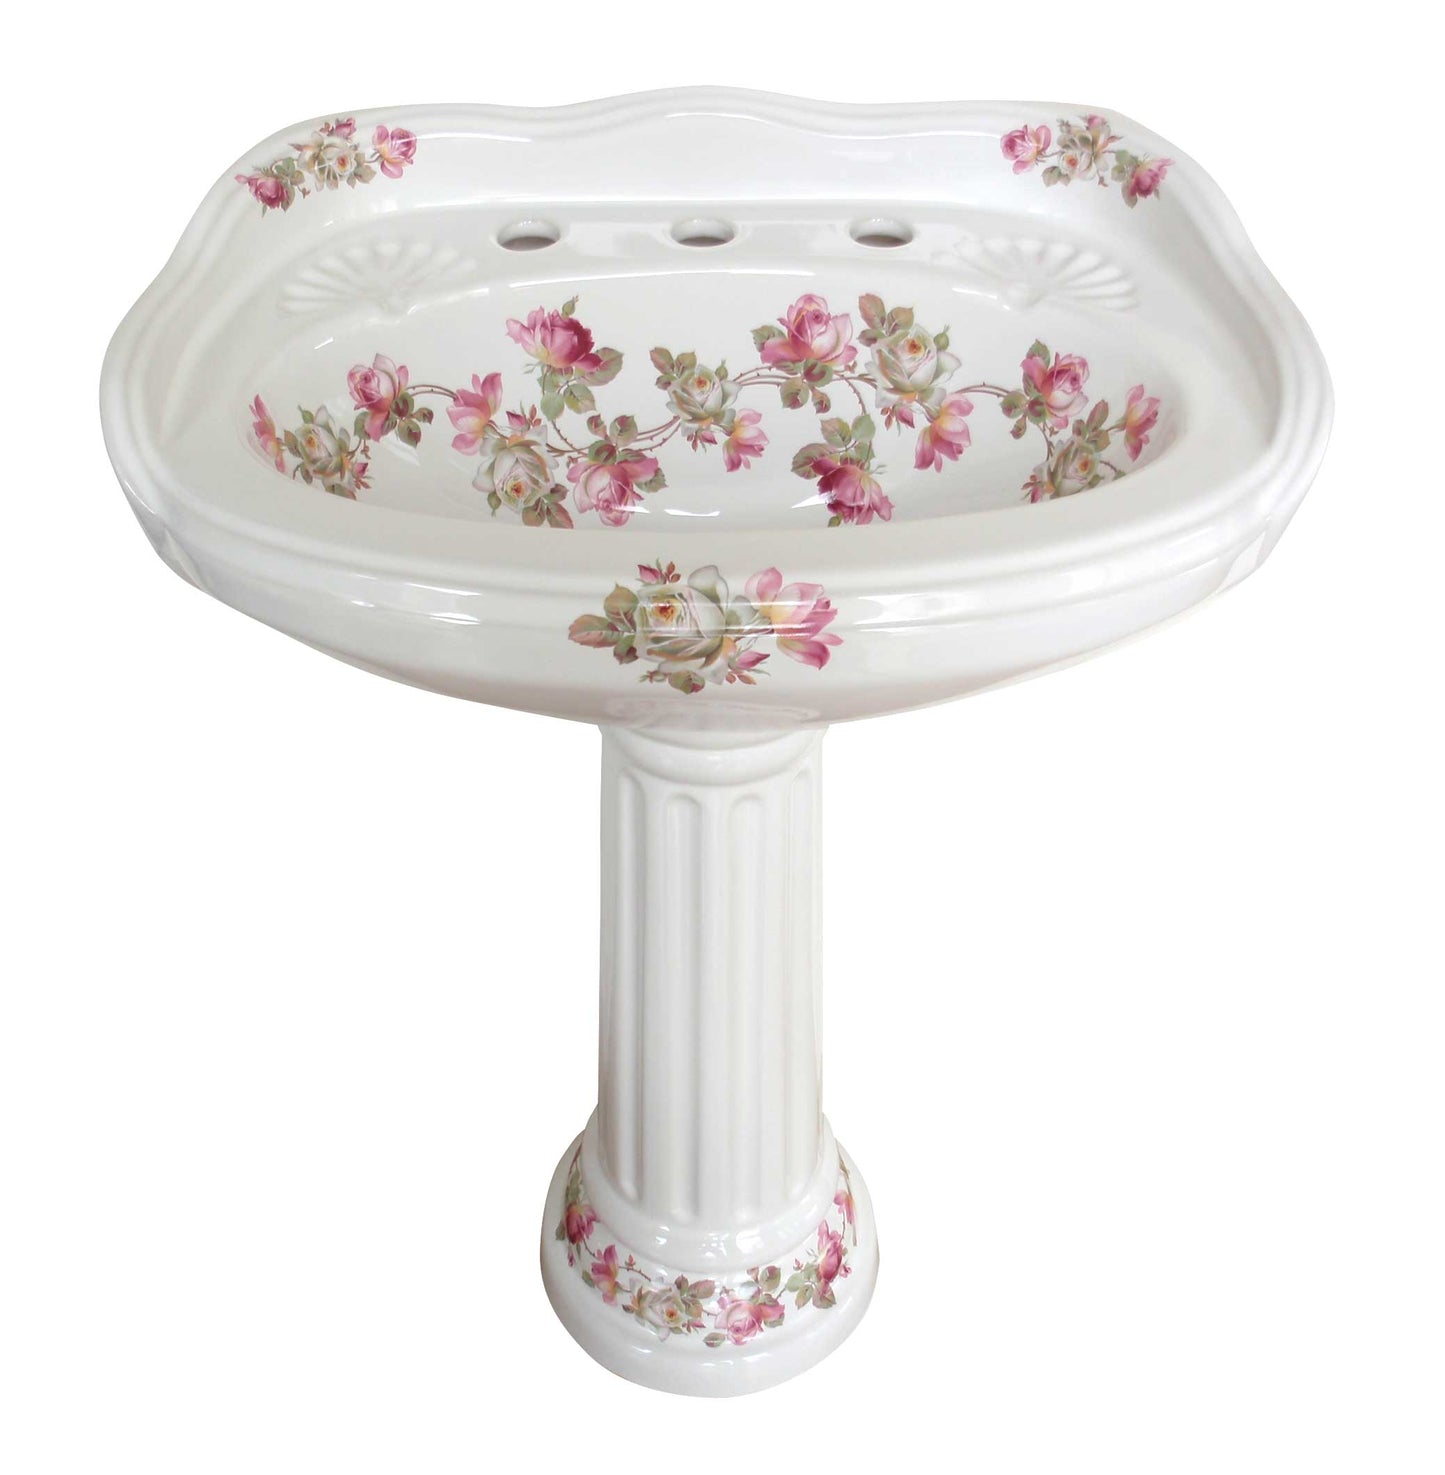 Traditional Pedestal lavatory painted with pink and white Geraldine roses